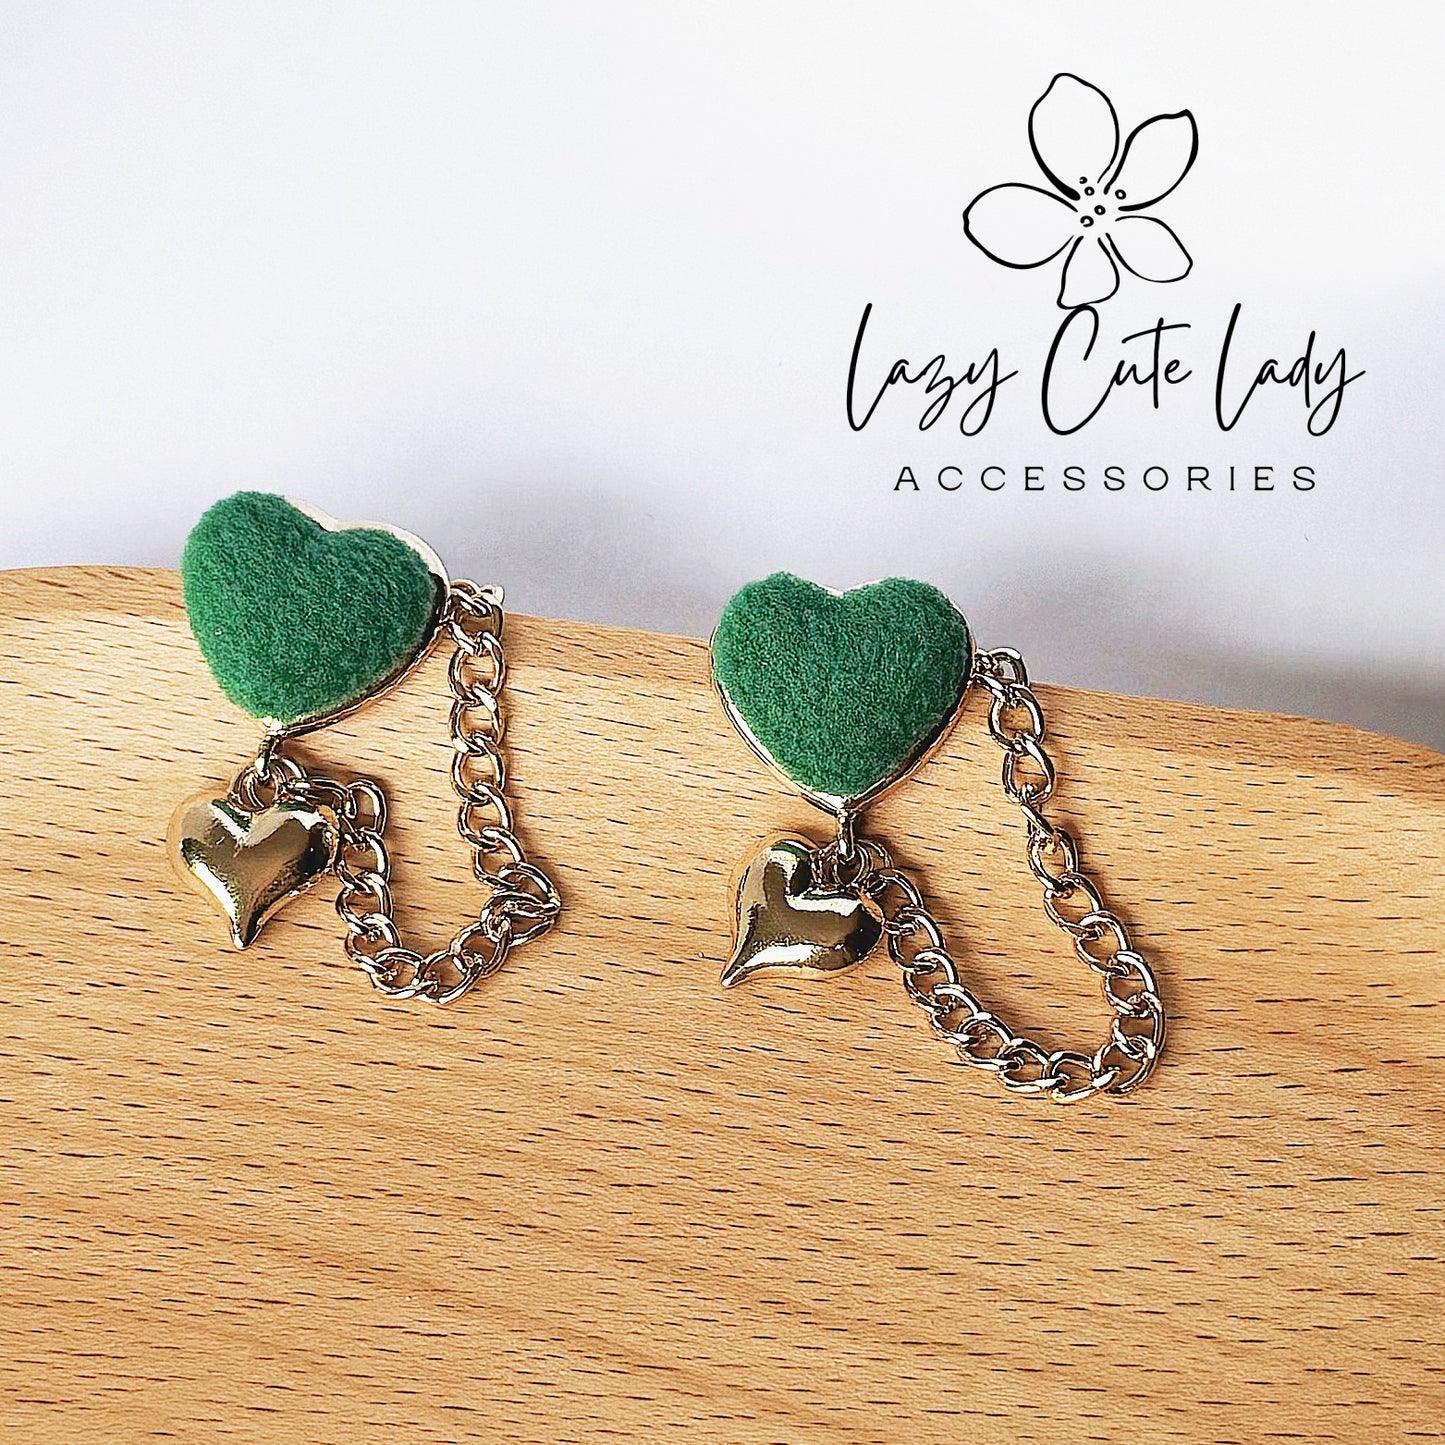 Green Fuzzy Heart & Metal Chain Earrings - Artistic and Eye-Catching Design